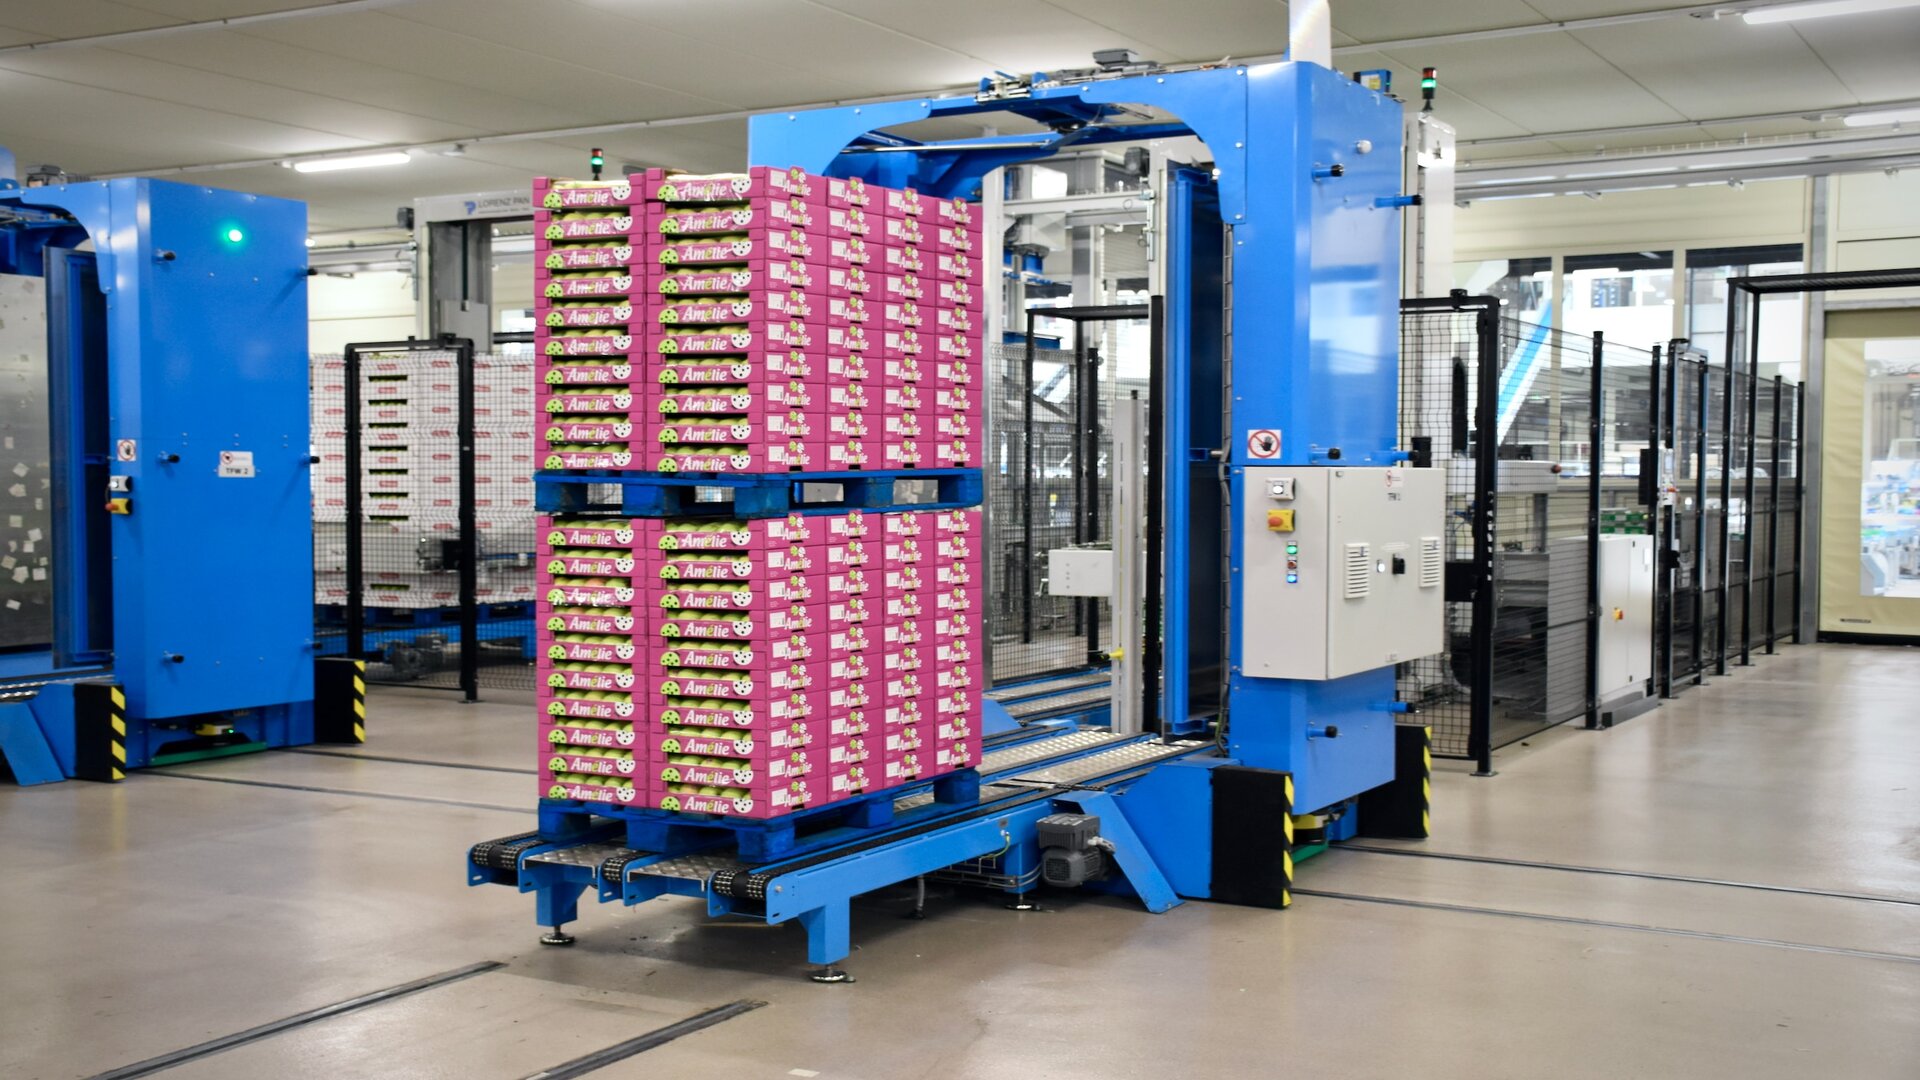 Packaging automation system at work in a production line